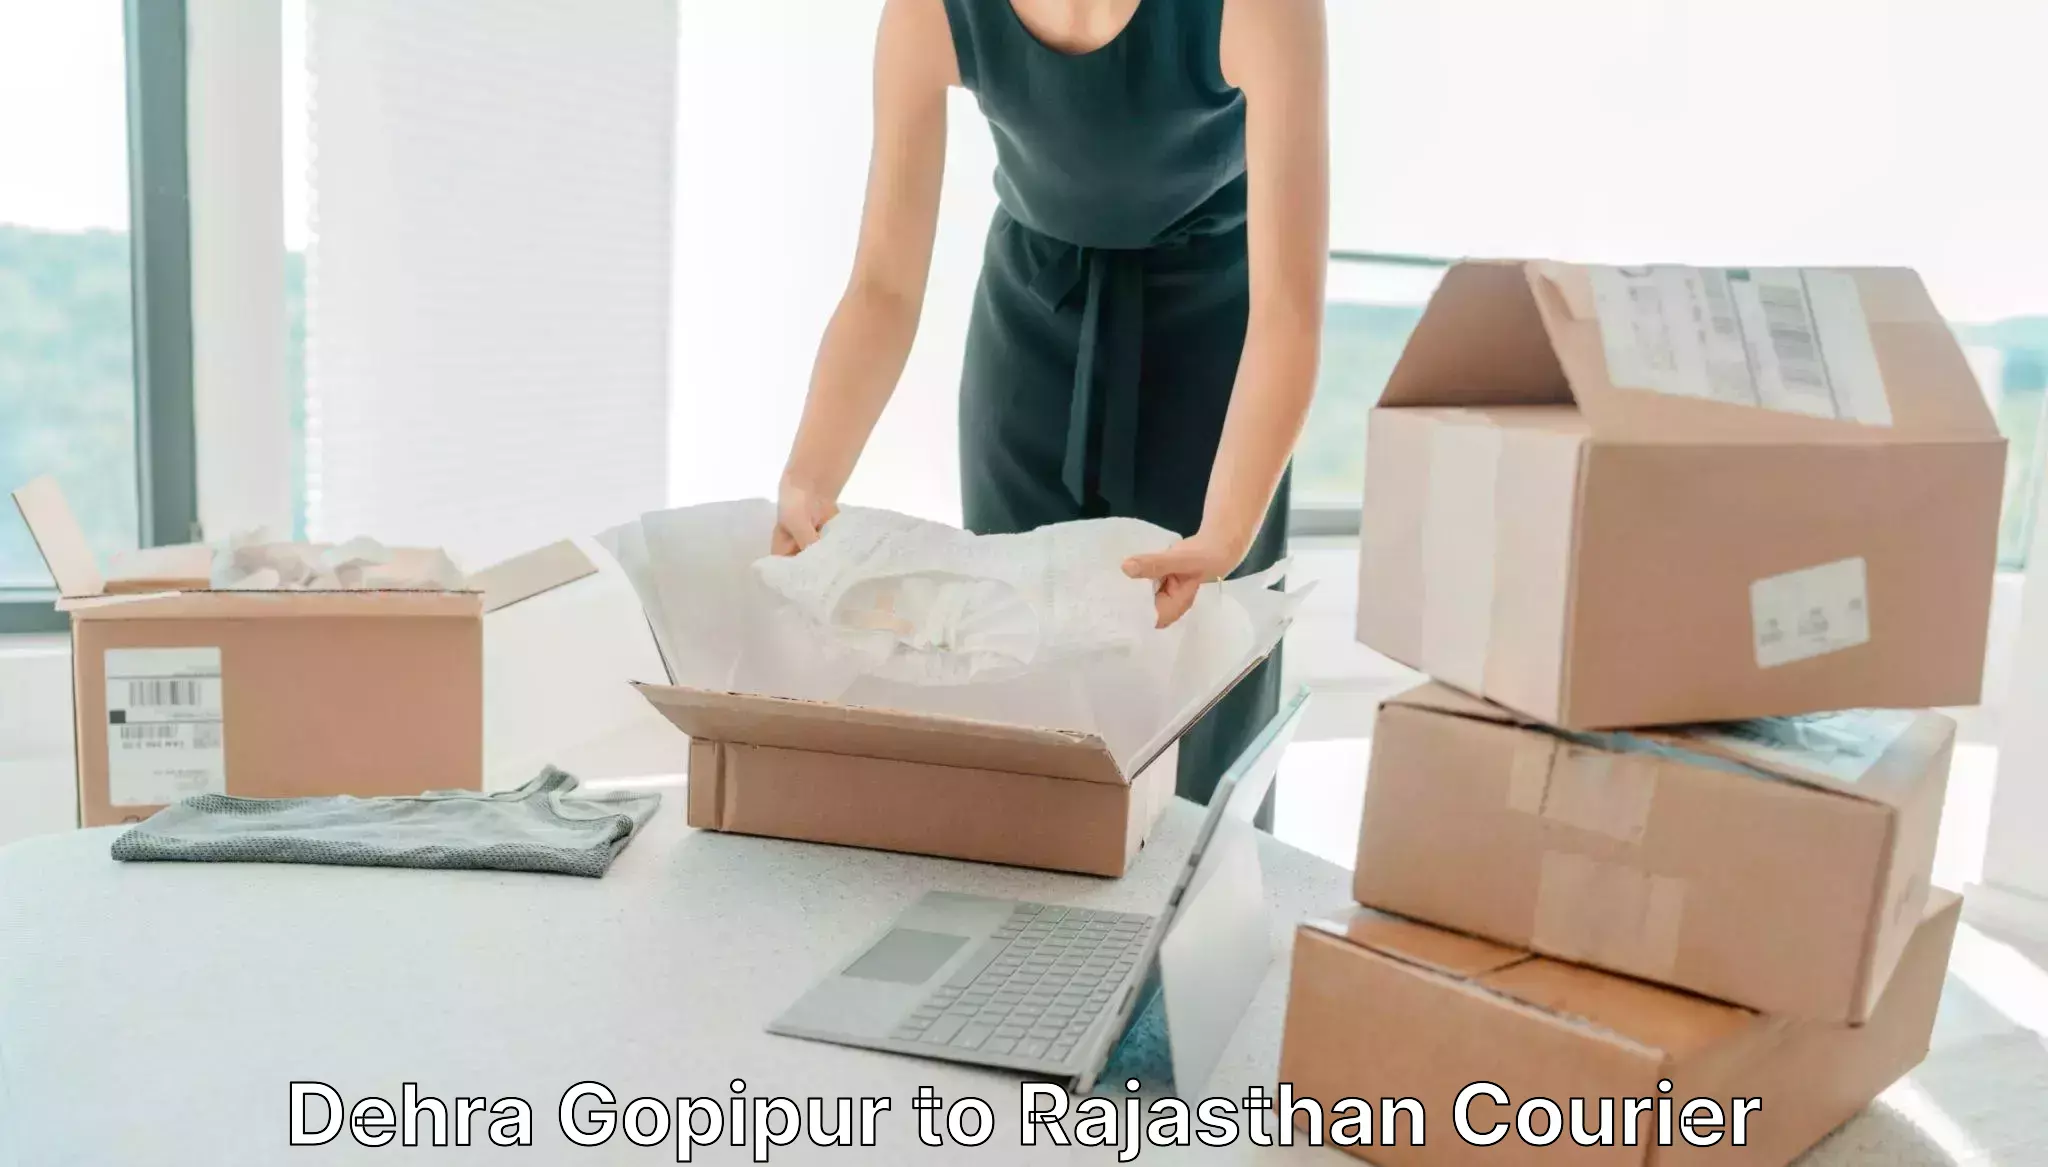 Nationwide shipping coverage Dehra Gopipur to Rajasthan